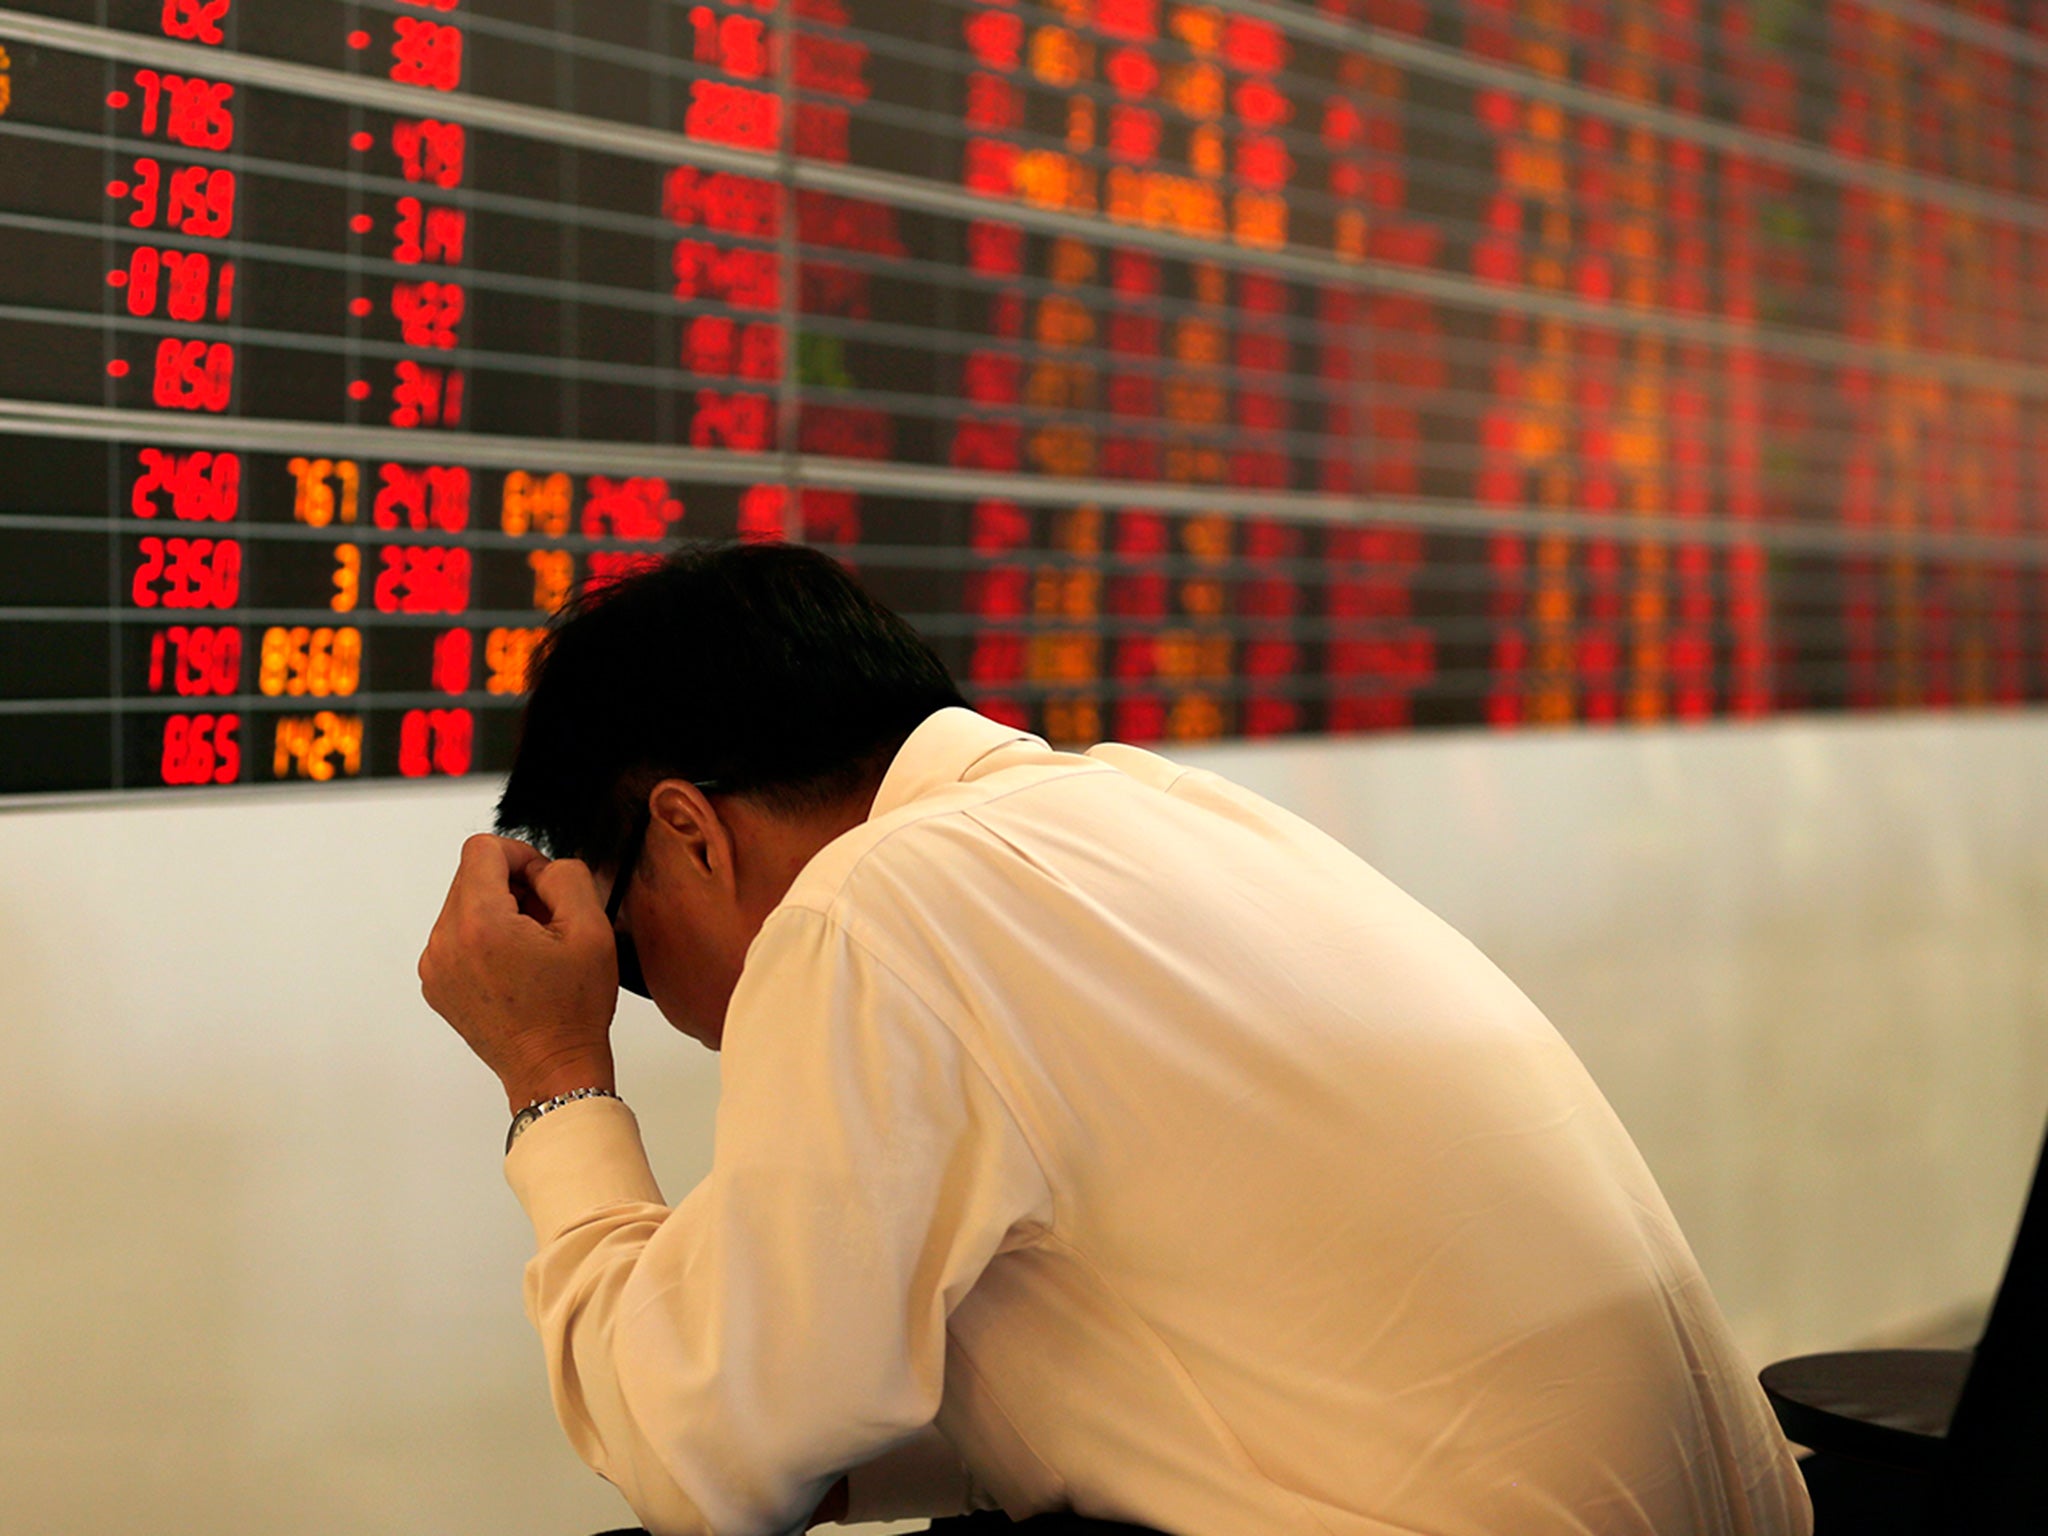 By mid-morning in China, Tuesday looked like it could bring with it another bloodbath.